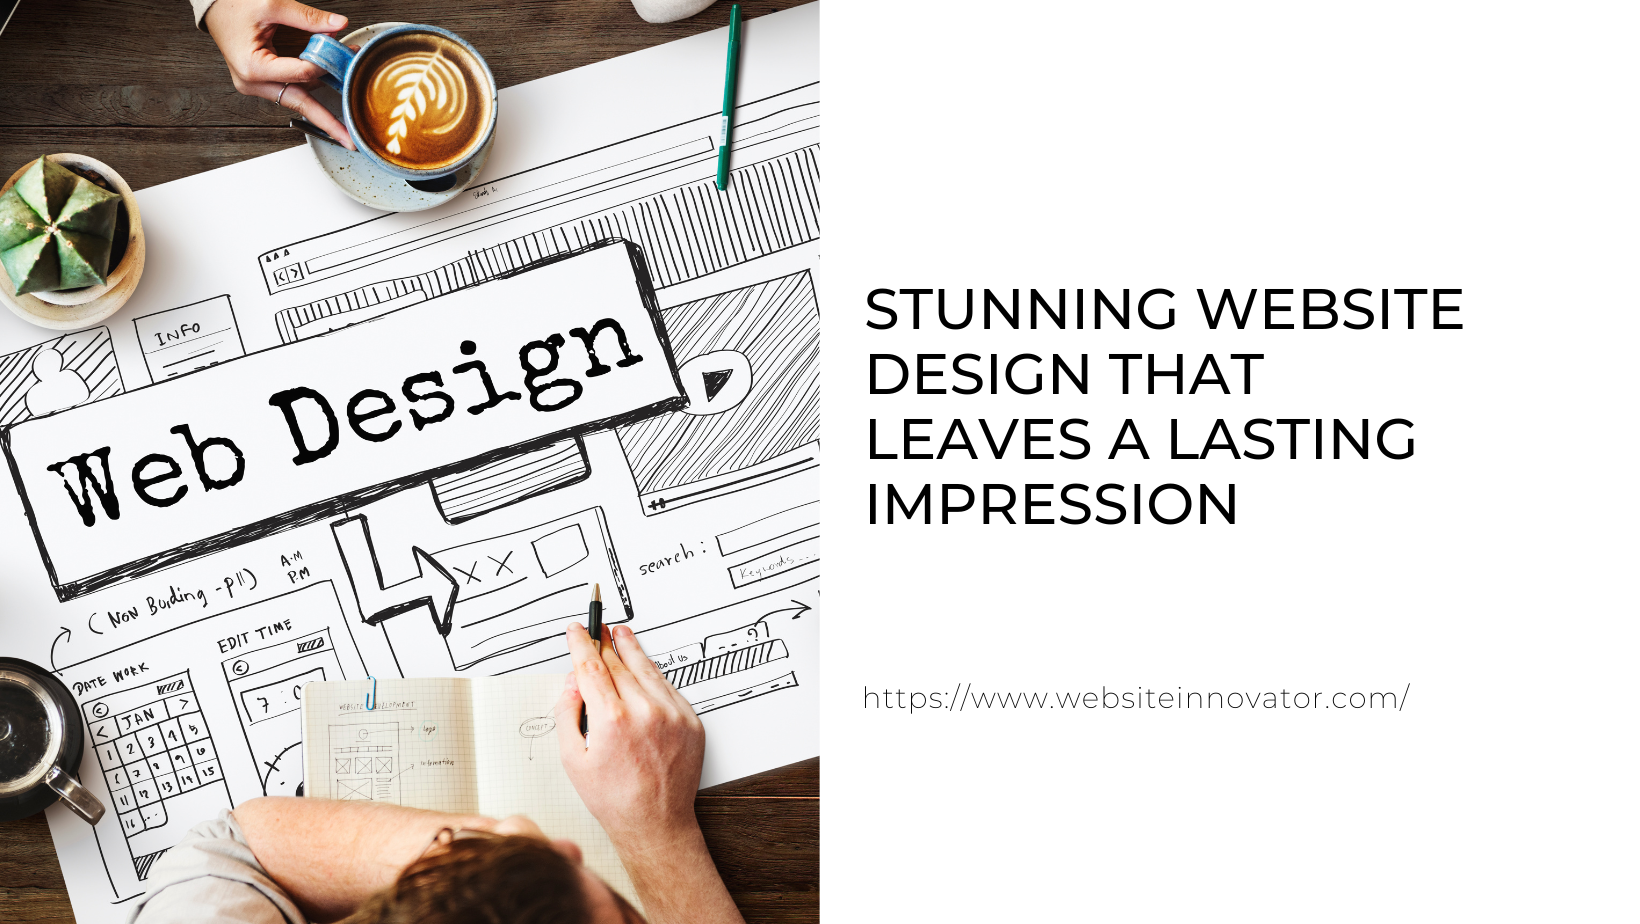 6 Key Elements of a Stunning Website Design That Leaves a Lasting Impression